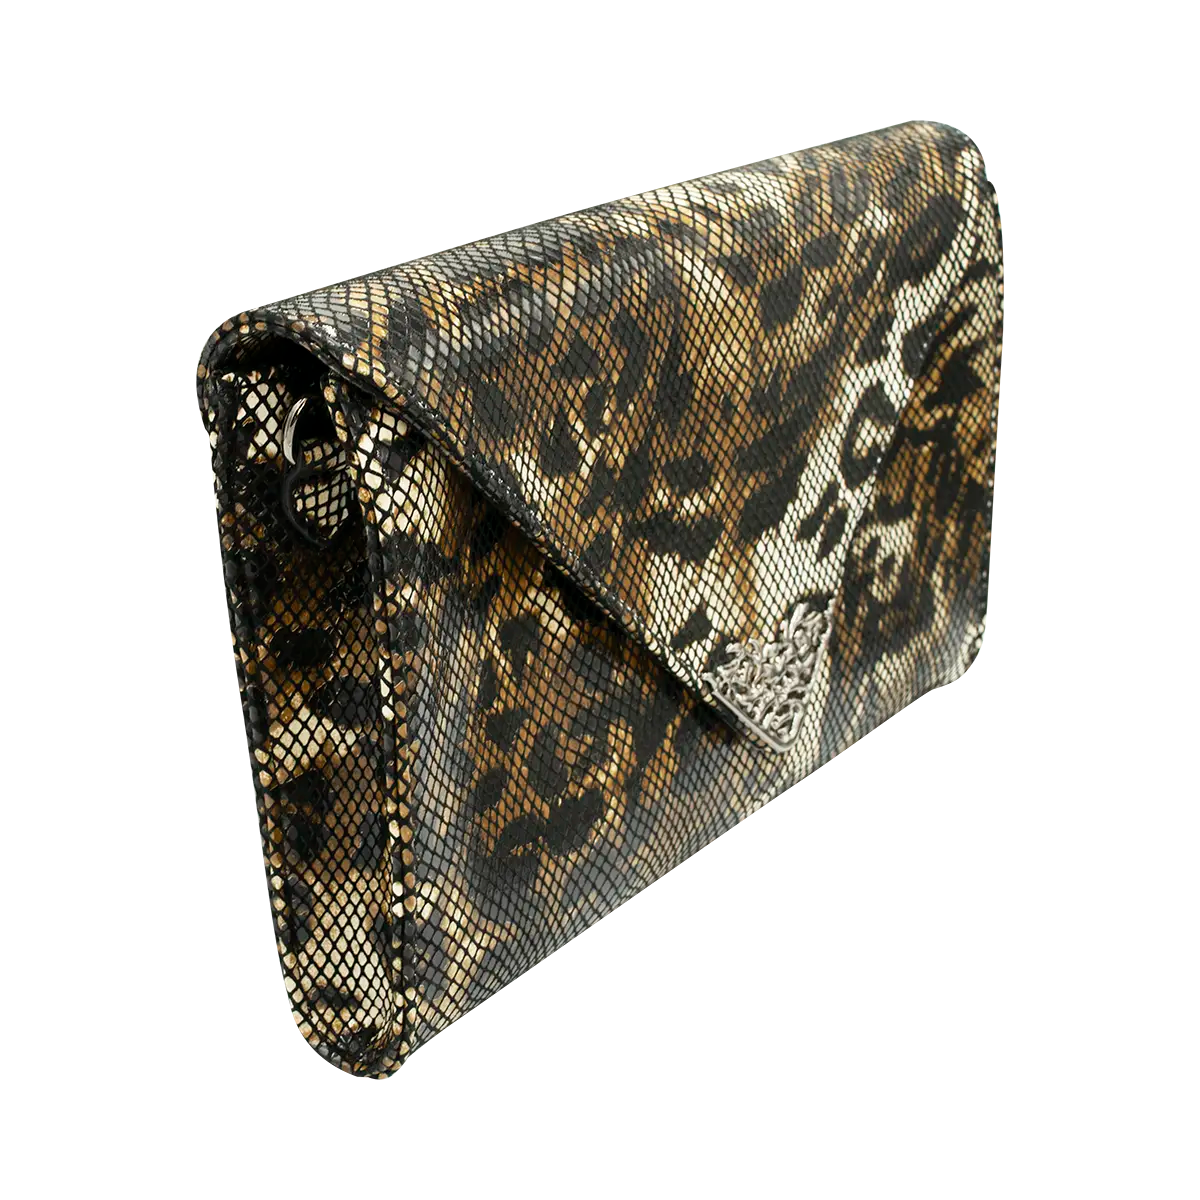 large animal print stripe print leather clutch with strap. Fashion accessory for women in San Diego, CA.